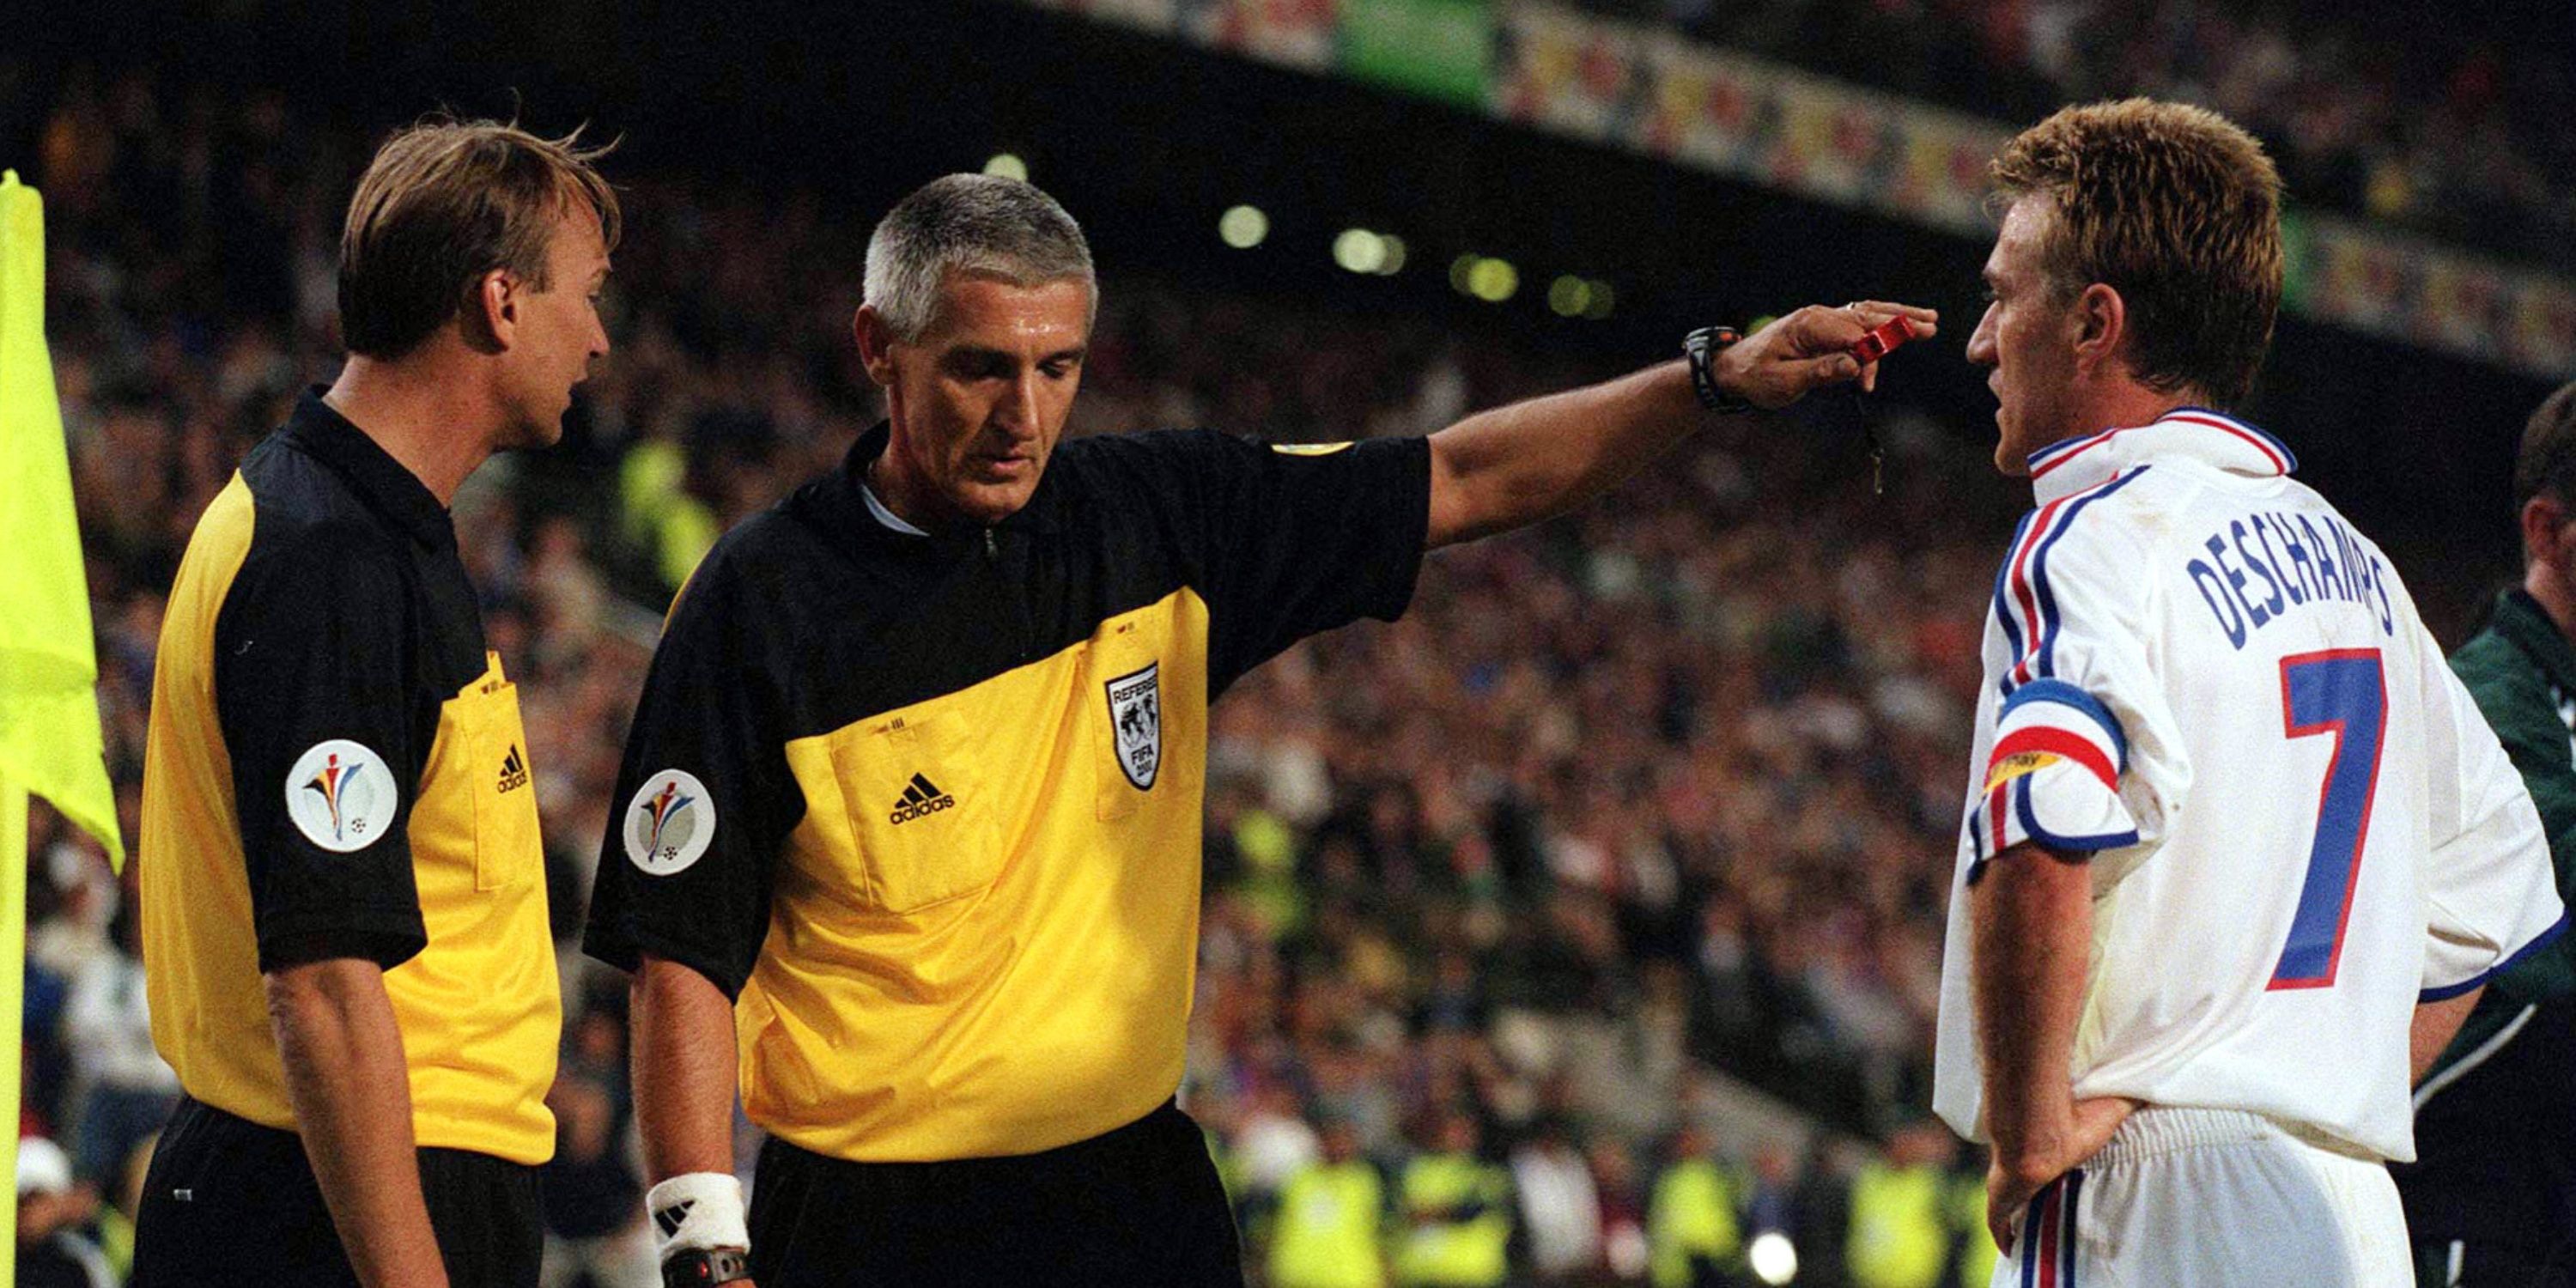 Didier Deschamps of France complaining to the referee.